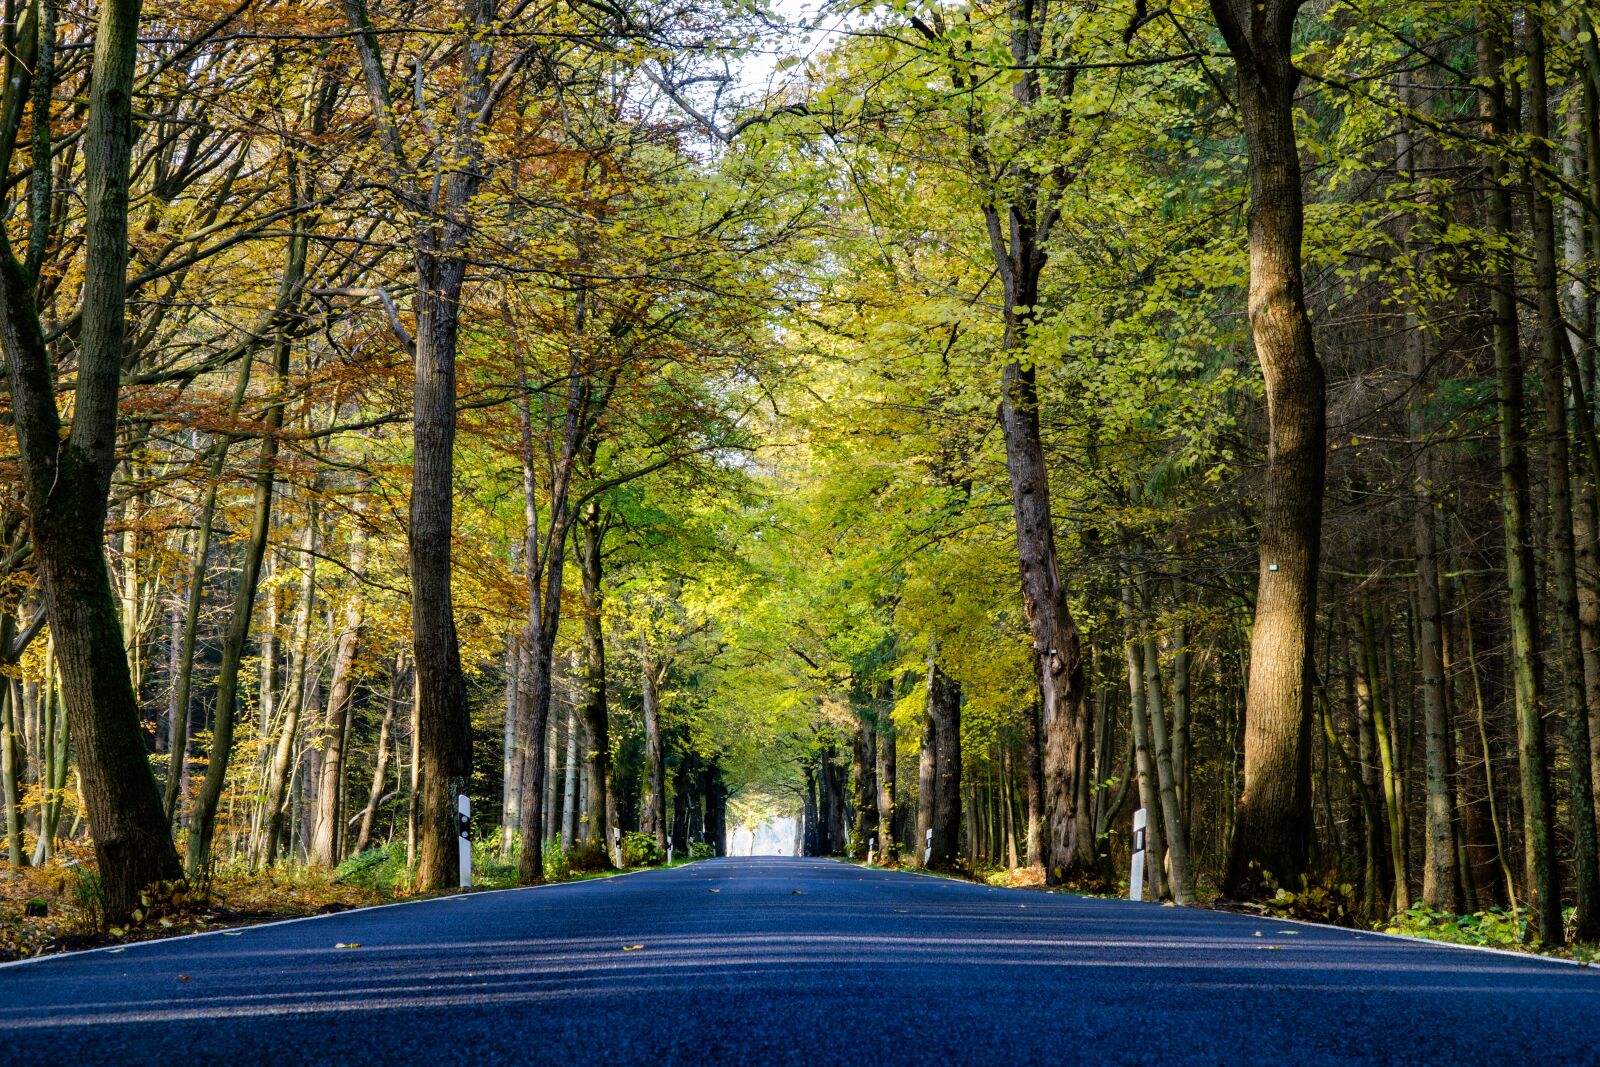 Sony a6000 sample photo. Autumn, road, landscape photography